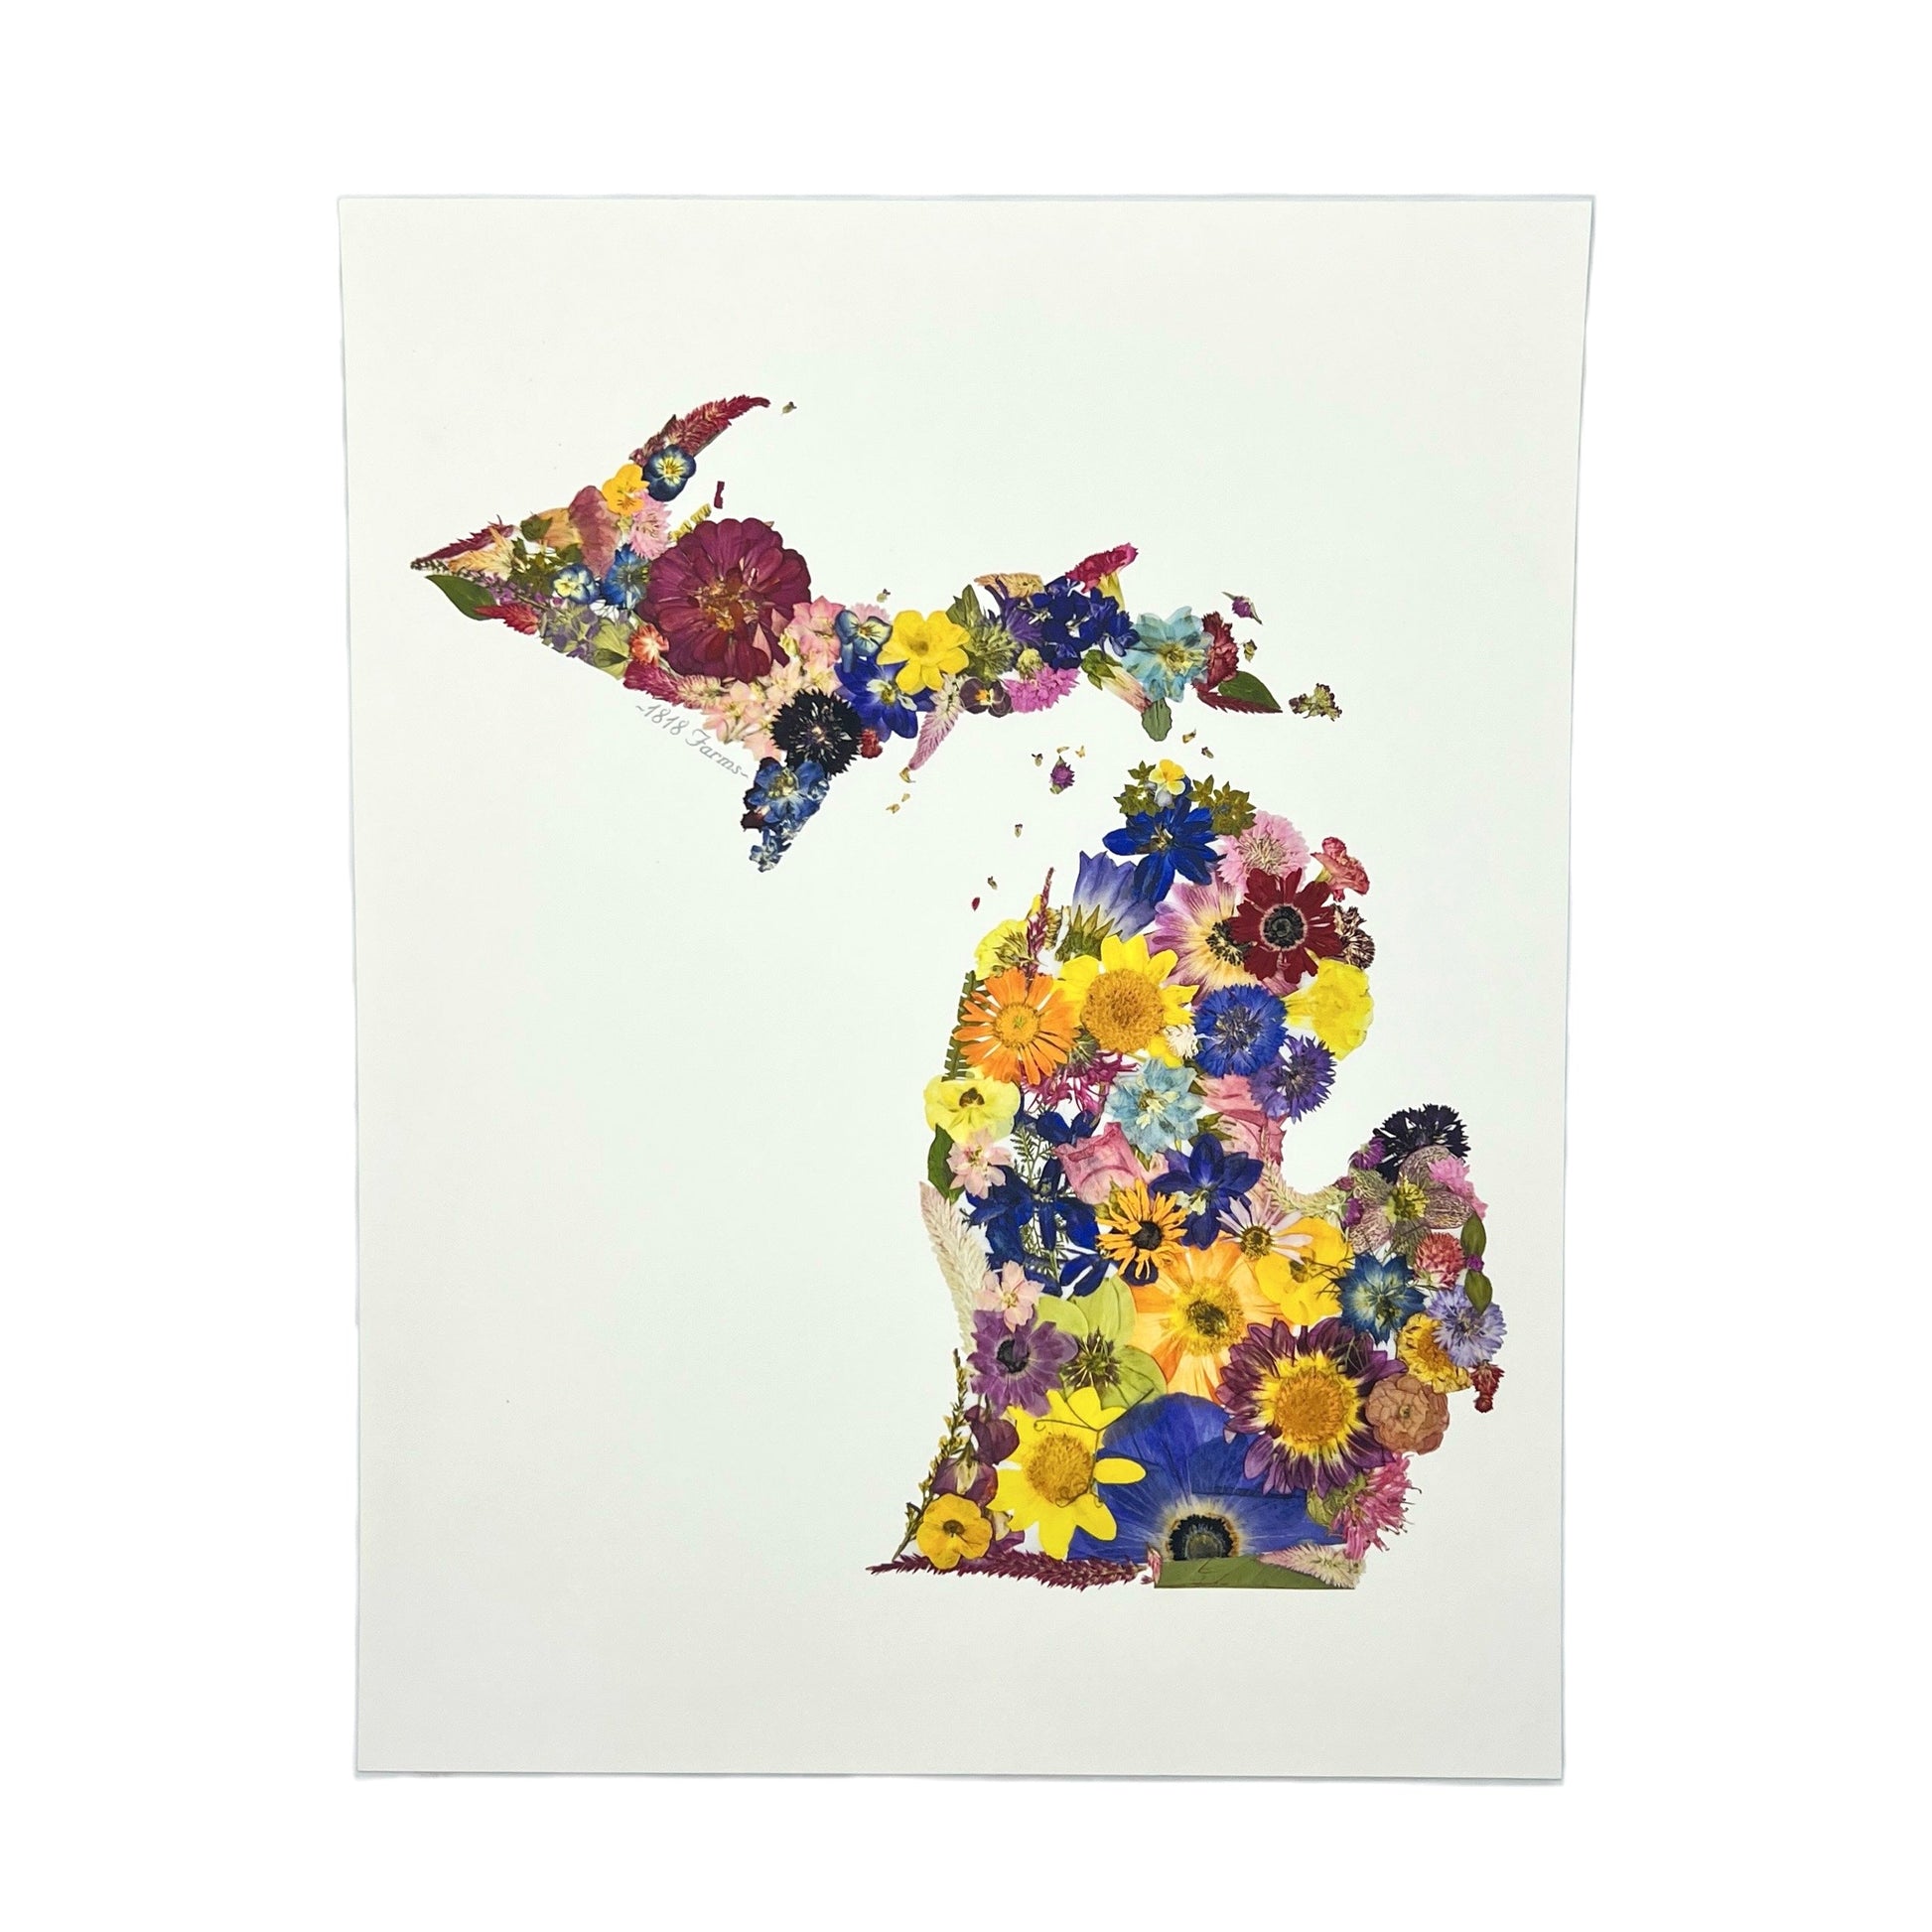 State Themed Giclée Print  - "Where I Bloom" Collection Giclee Art Print 1818 Farms 8"x10" Michigan 